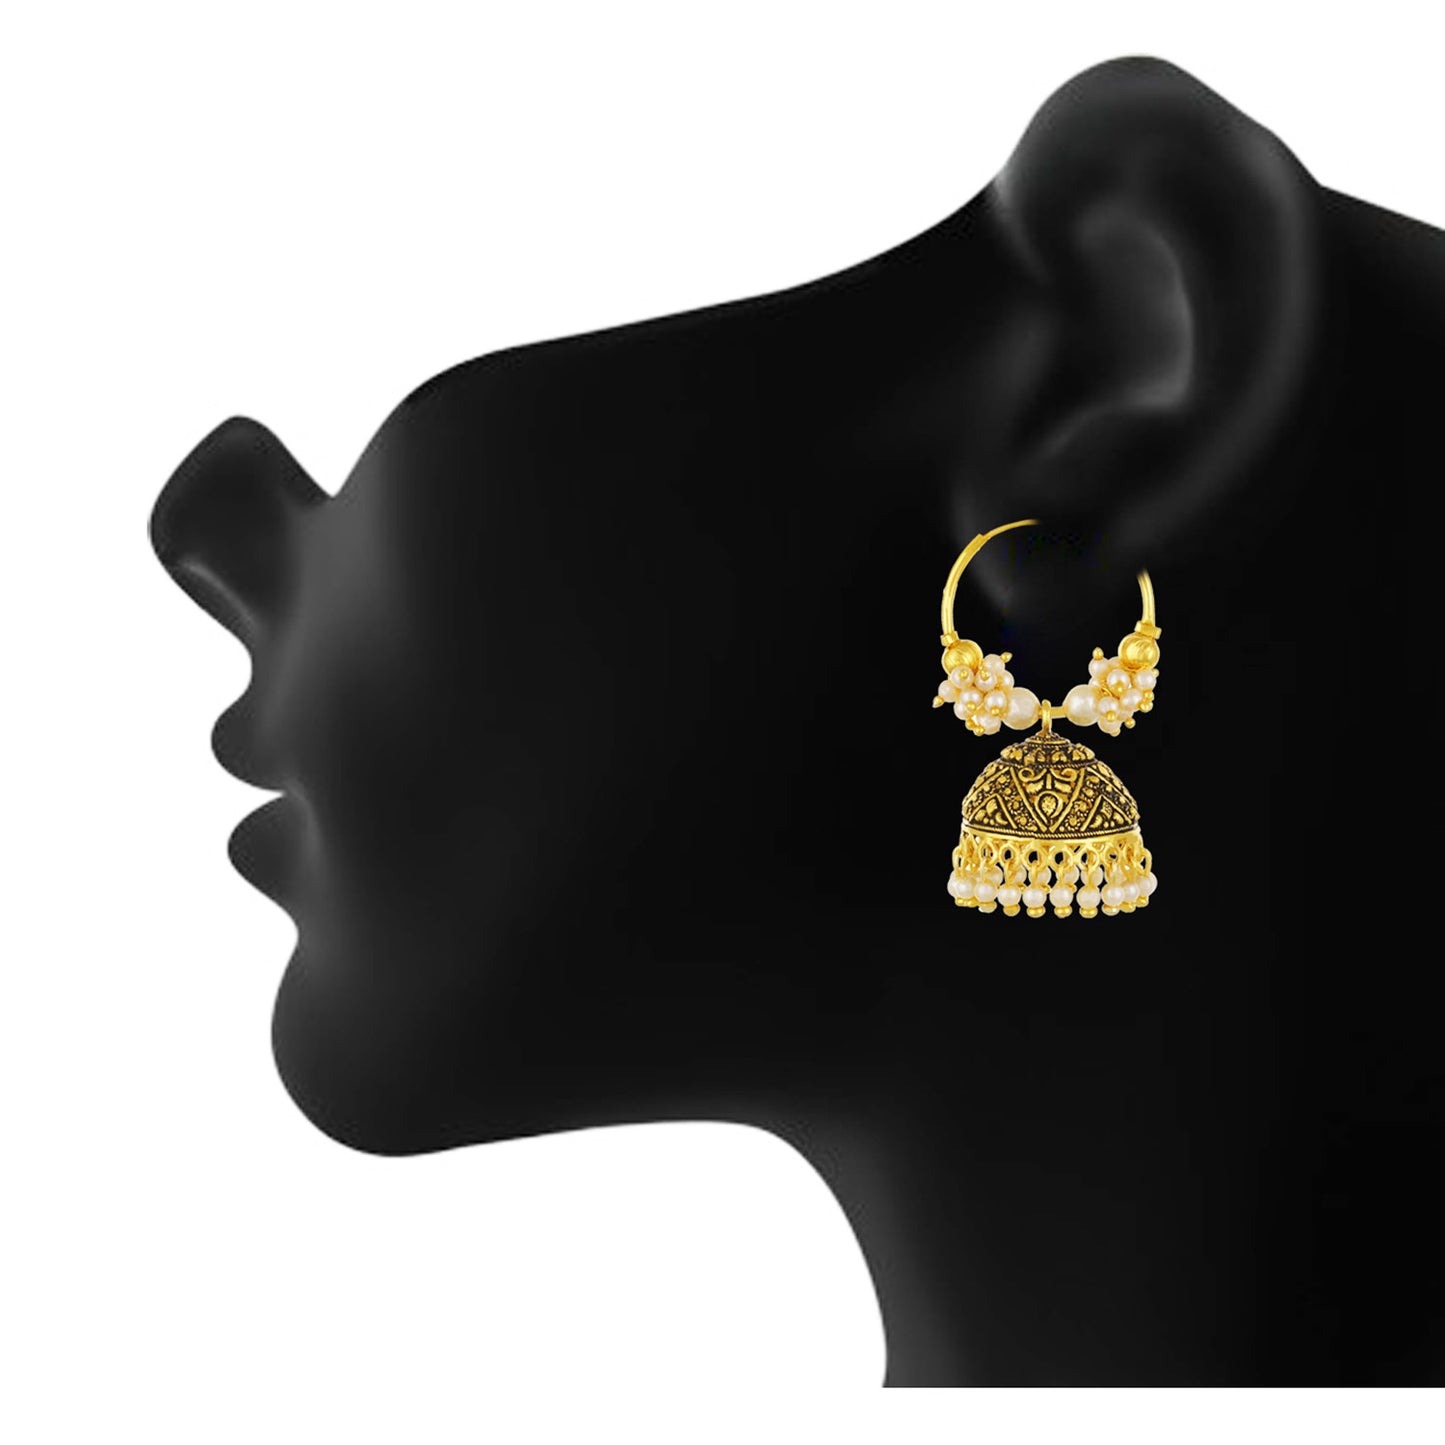 Gold plated Chandbali Jhumki Pearl Earrings Fashion Imitaion Jewelry for Girls and Women